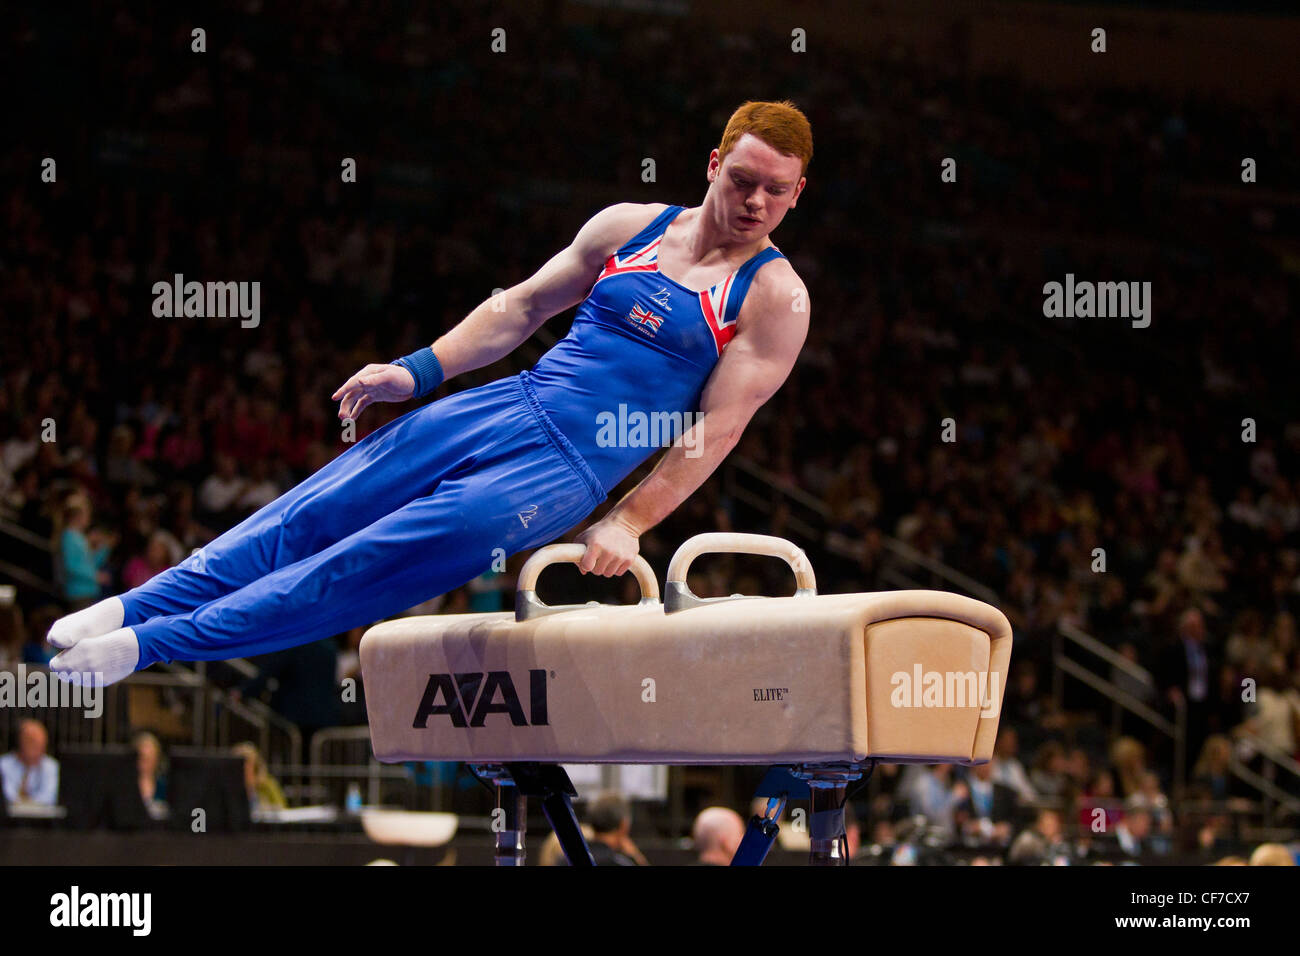 Daniel Purvis (GBR) competes in the pommel horse event at the 2012 American Cup Gymnastics Stock Photo